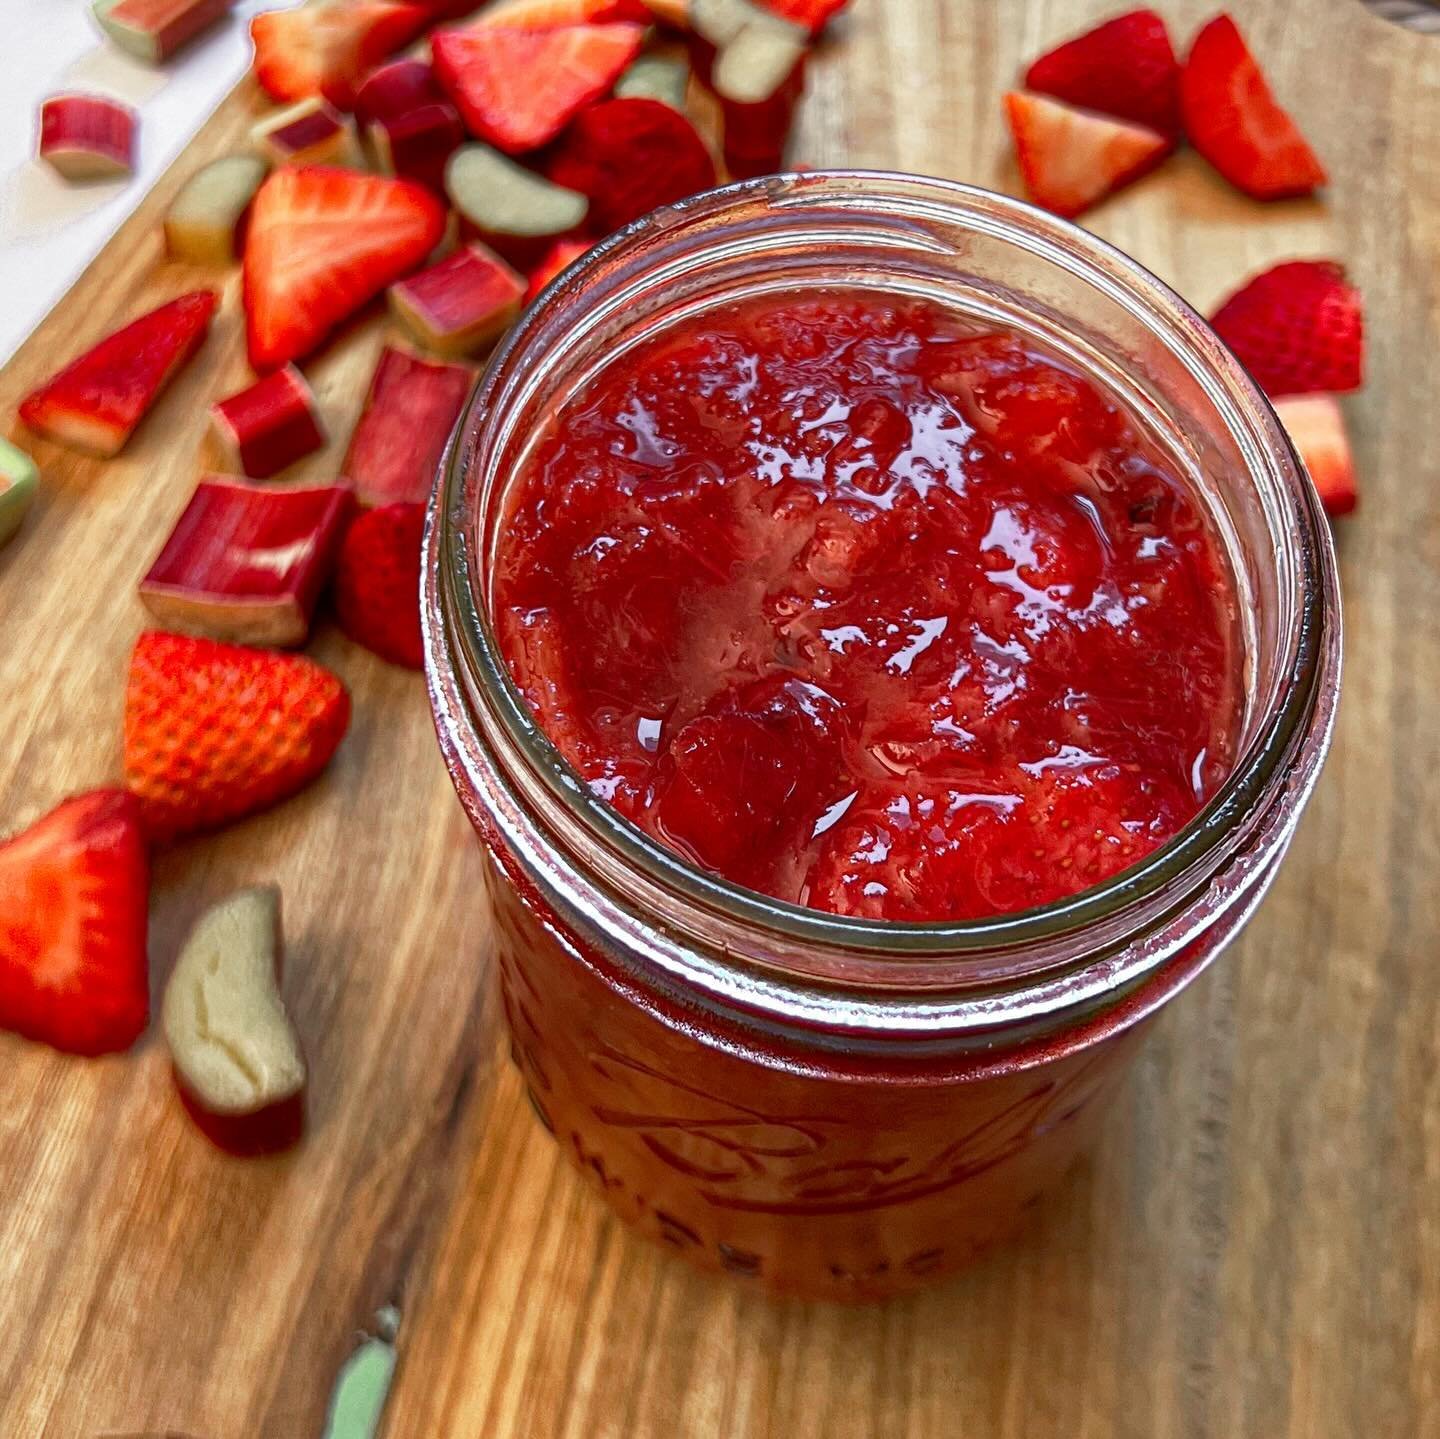 Rhubarb &amp; Strawberry Compote 

Spring is a special time of year. One of my favorite treats to see appear at the market is rhubarb, I love to stalk this gorgeous stalk of goodness. Fun fact, well scary fact, you can&rsquo;t eat rhubarb leaves, the